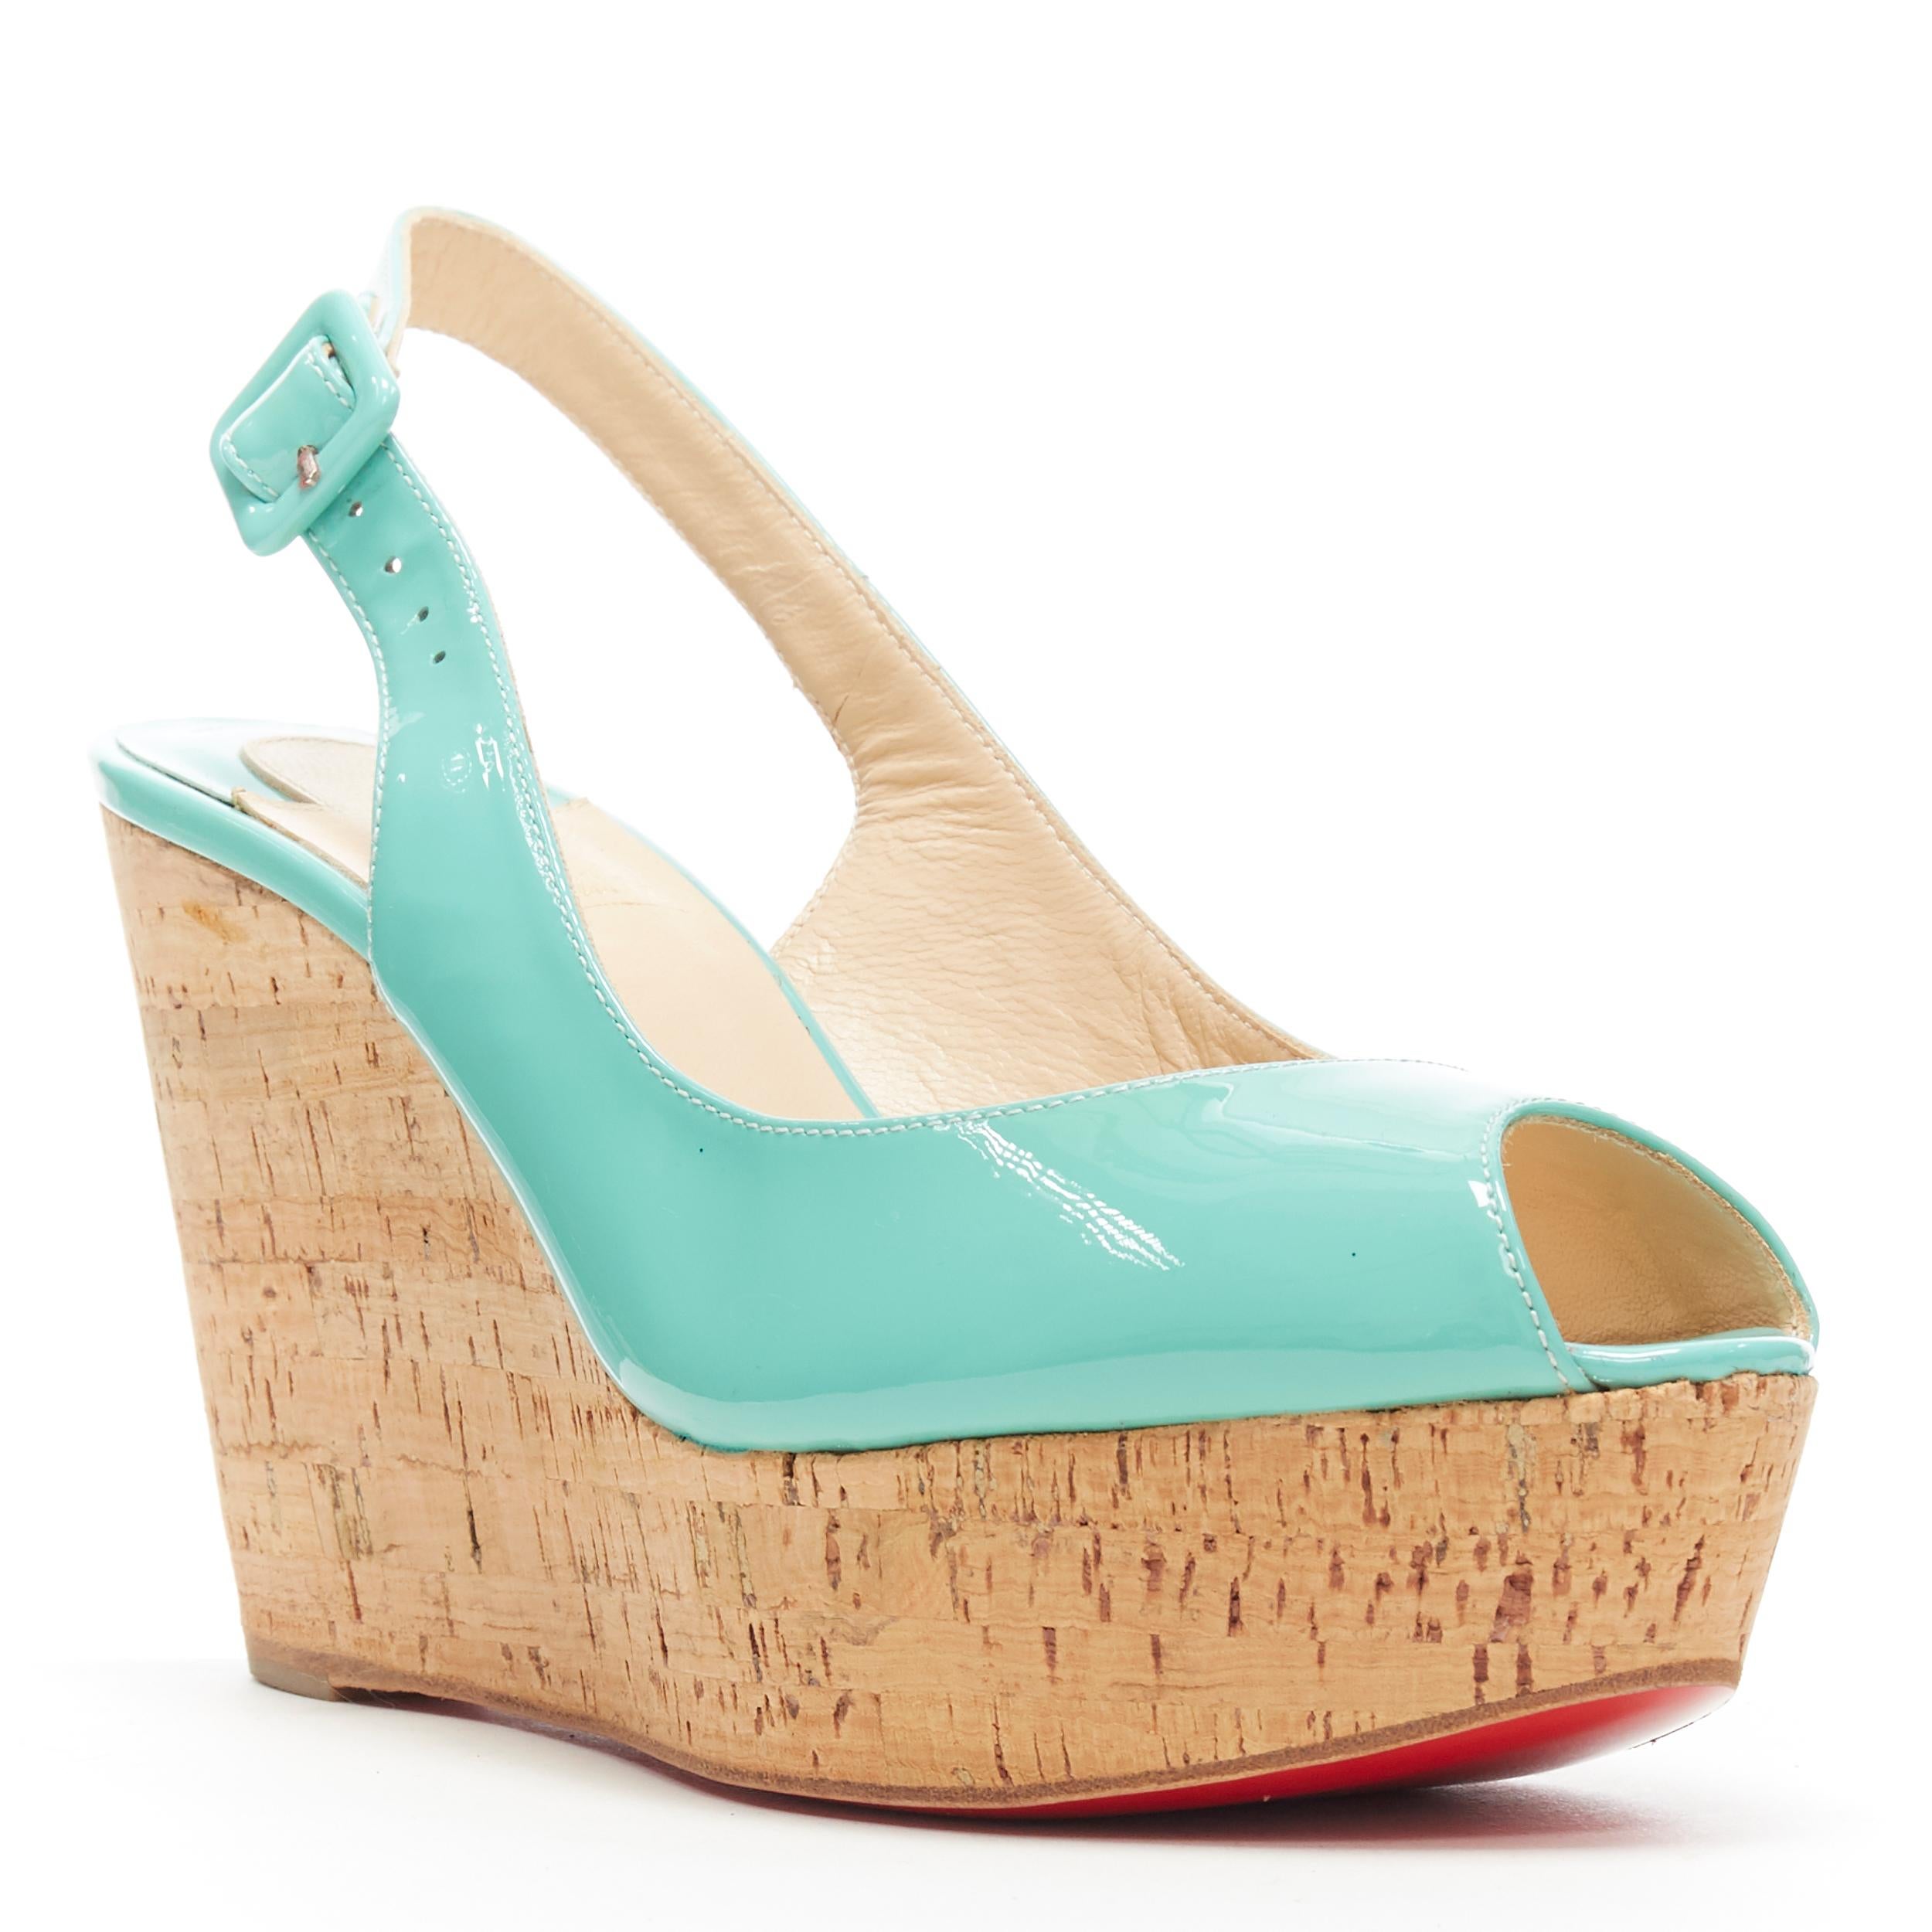 new CHRISTIAN LOUBOUTIN Une Plume Sling 100 turquoise peeptoe cork wedge EU37
Brand: Christian Louboutin
Designer: Christian Louboutin
Model Name / Style: Une Plume Sling 100
Material: Patent leather
Color: Blue
Pattern: Solid
Closure: Buckle
Lining